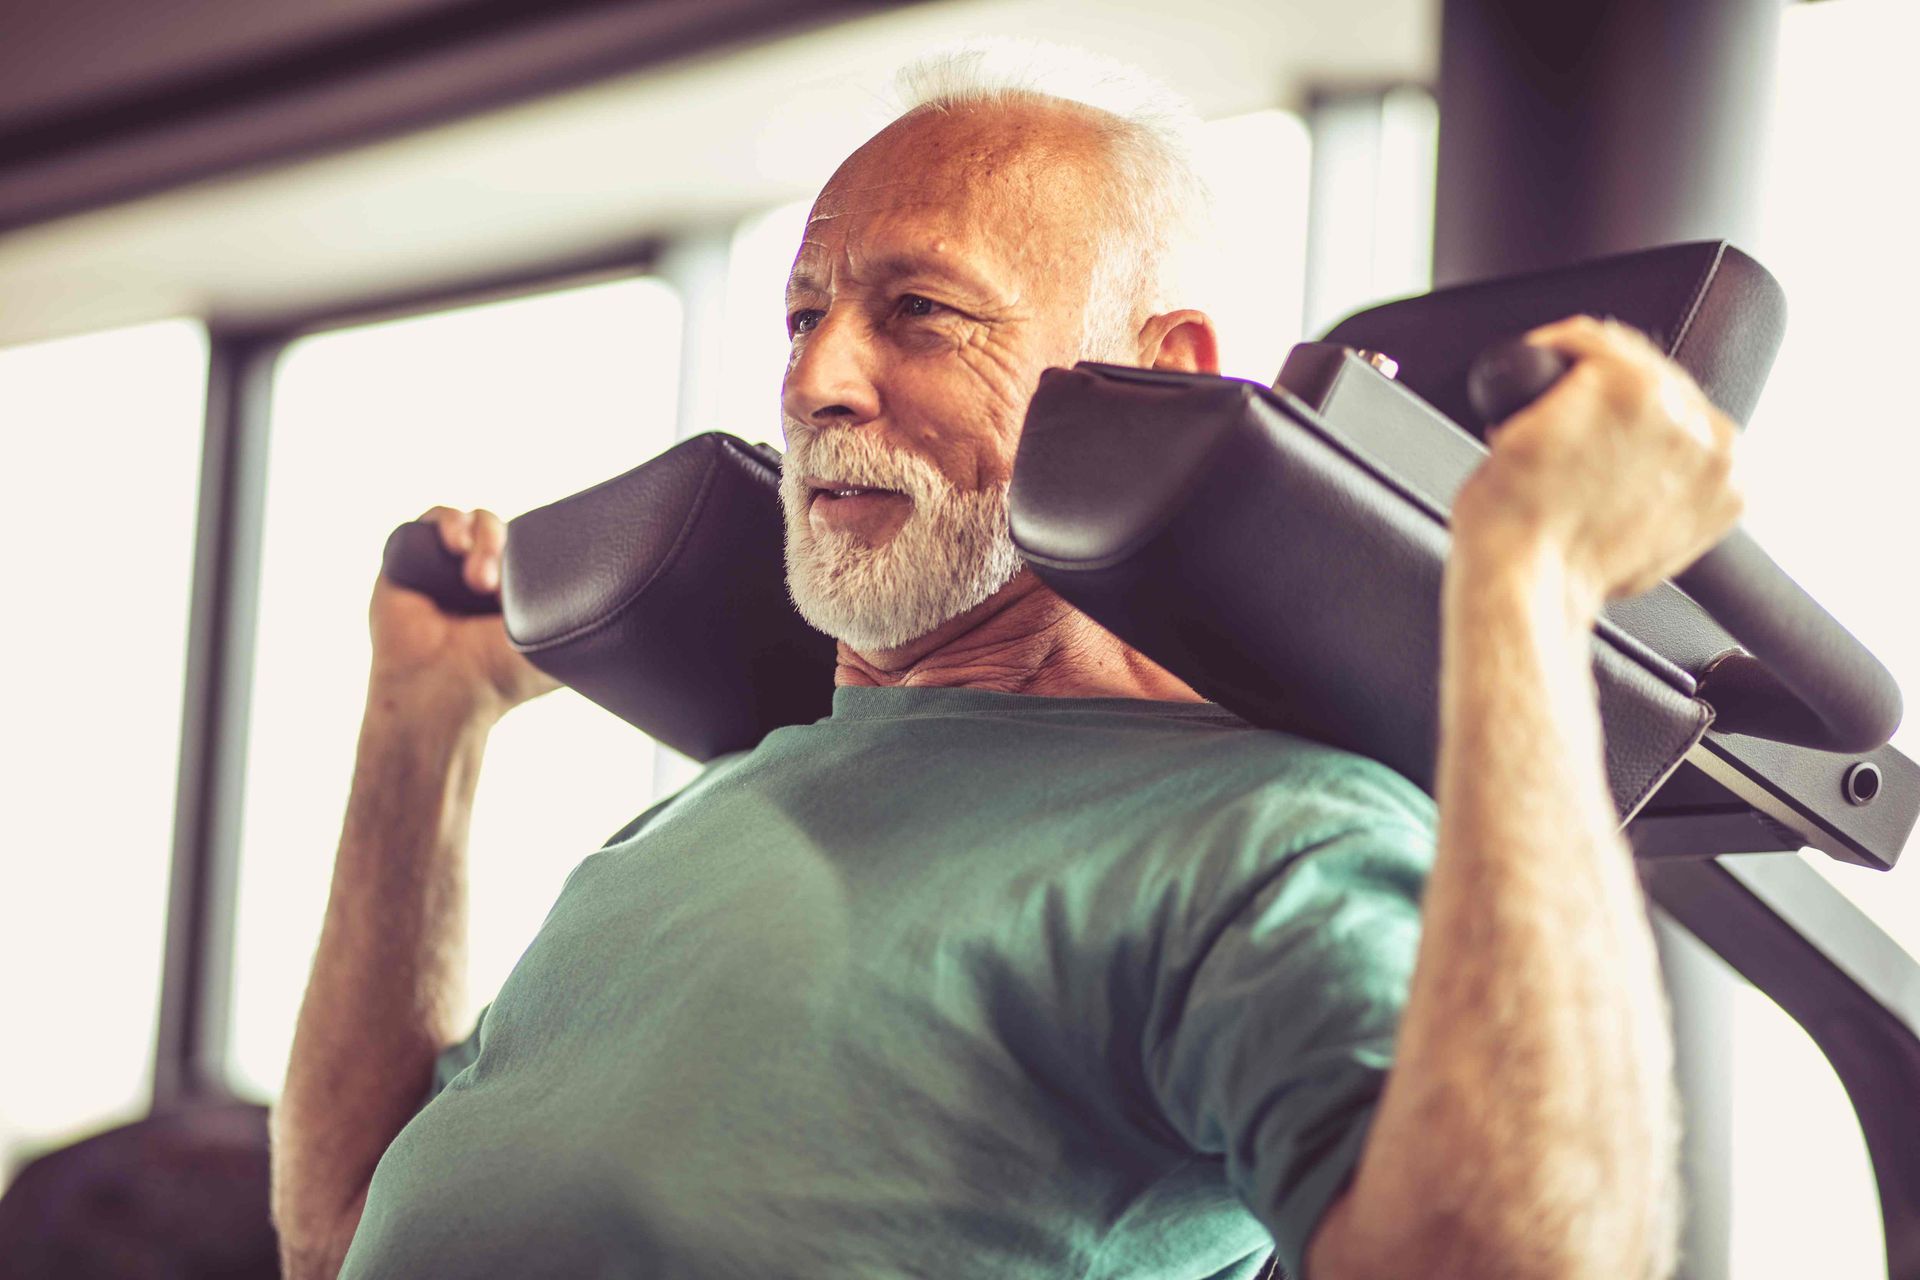 A photo of an elderly man doing shoulder presses on a machine